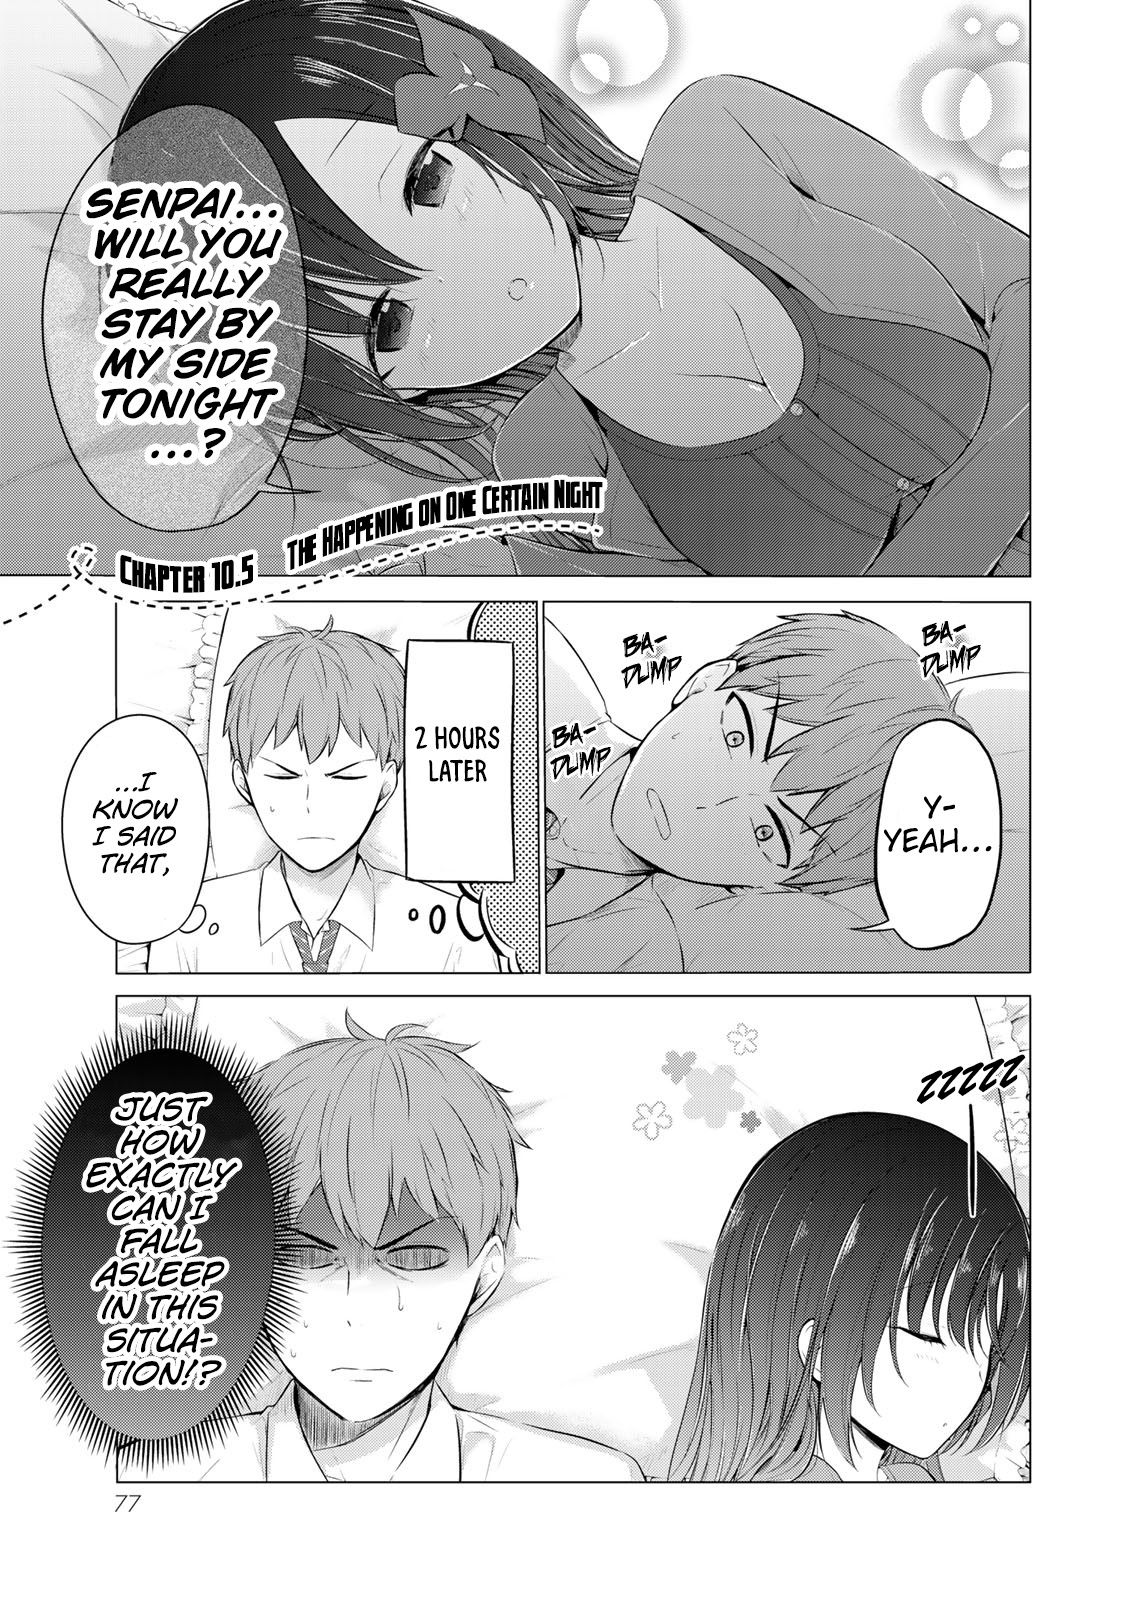 The Student Council President Solves Everything On The Bed - Page 2